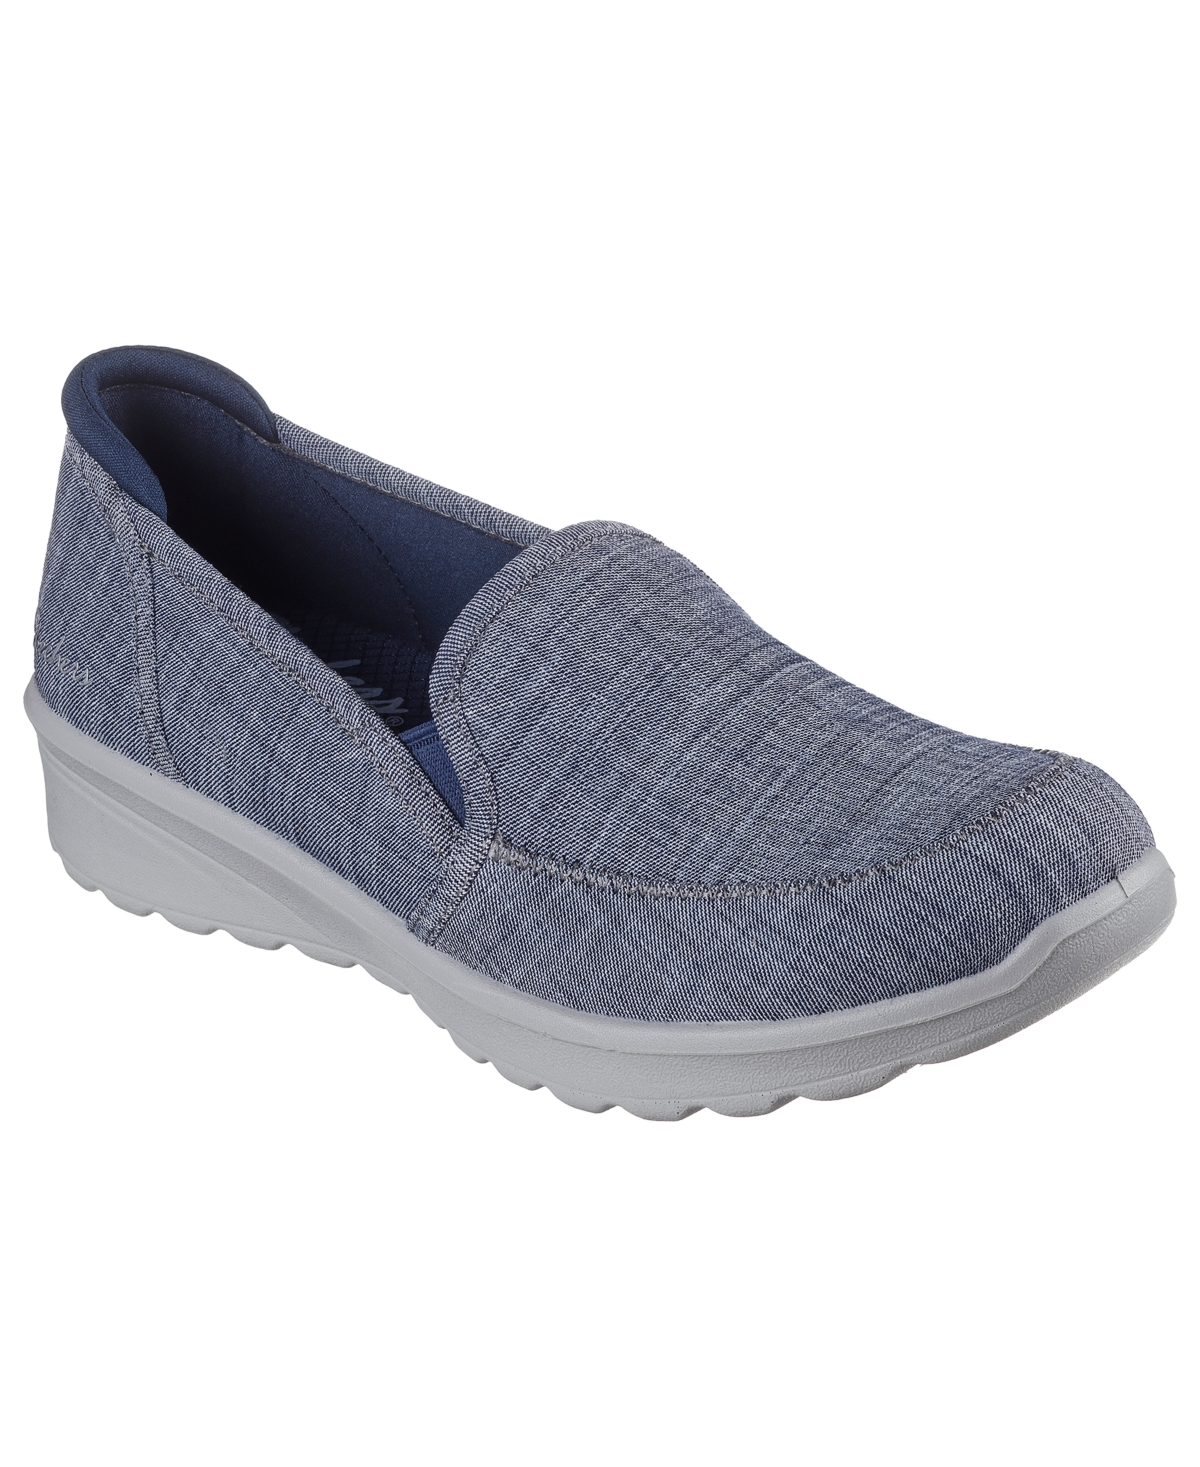 Skechers Women's Lovely Vibe Slip-on Casual Sneakers From Finish Line In Nvy-navy